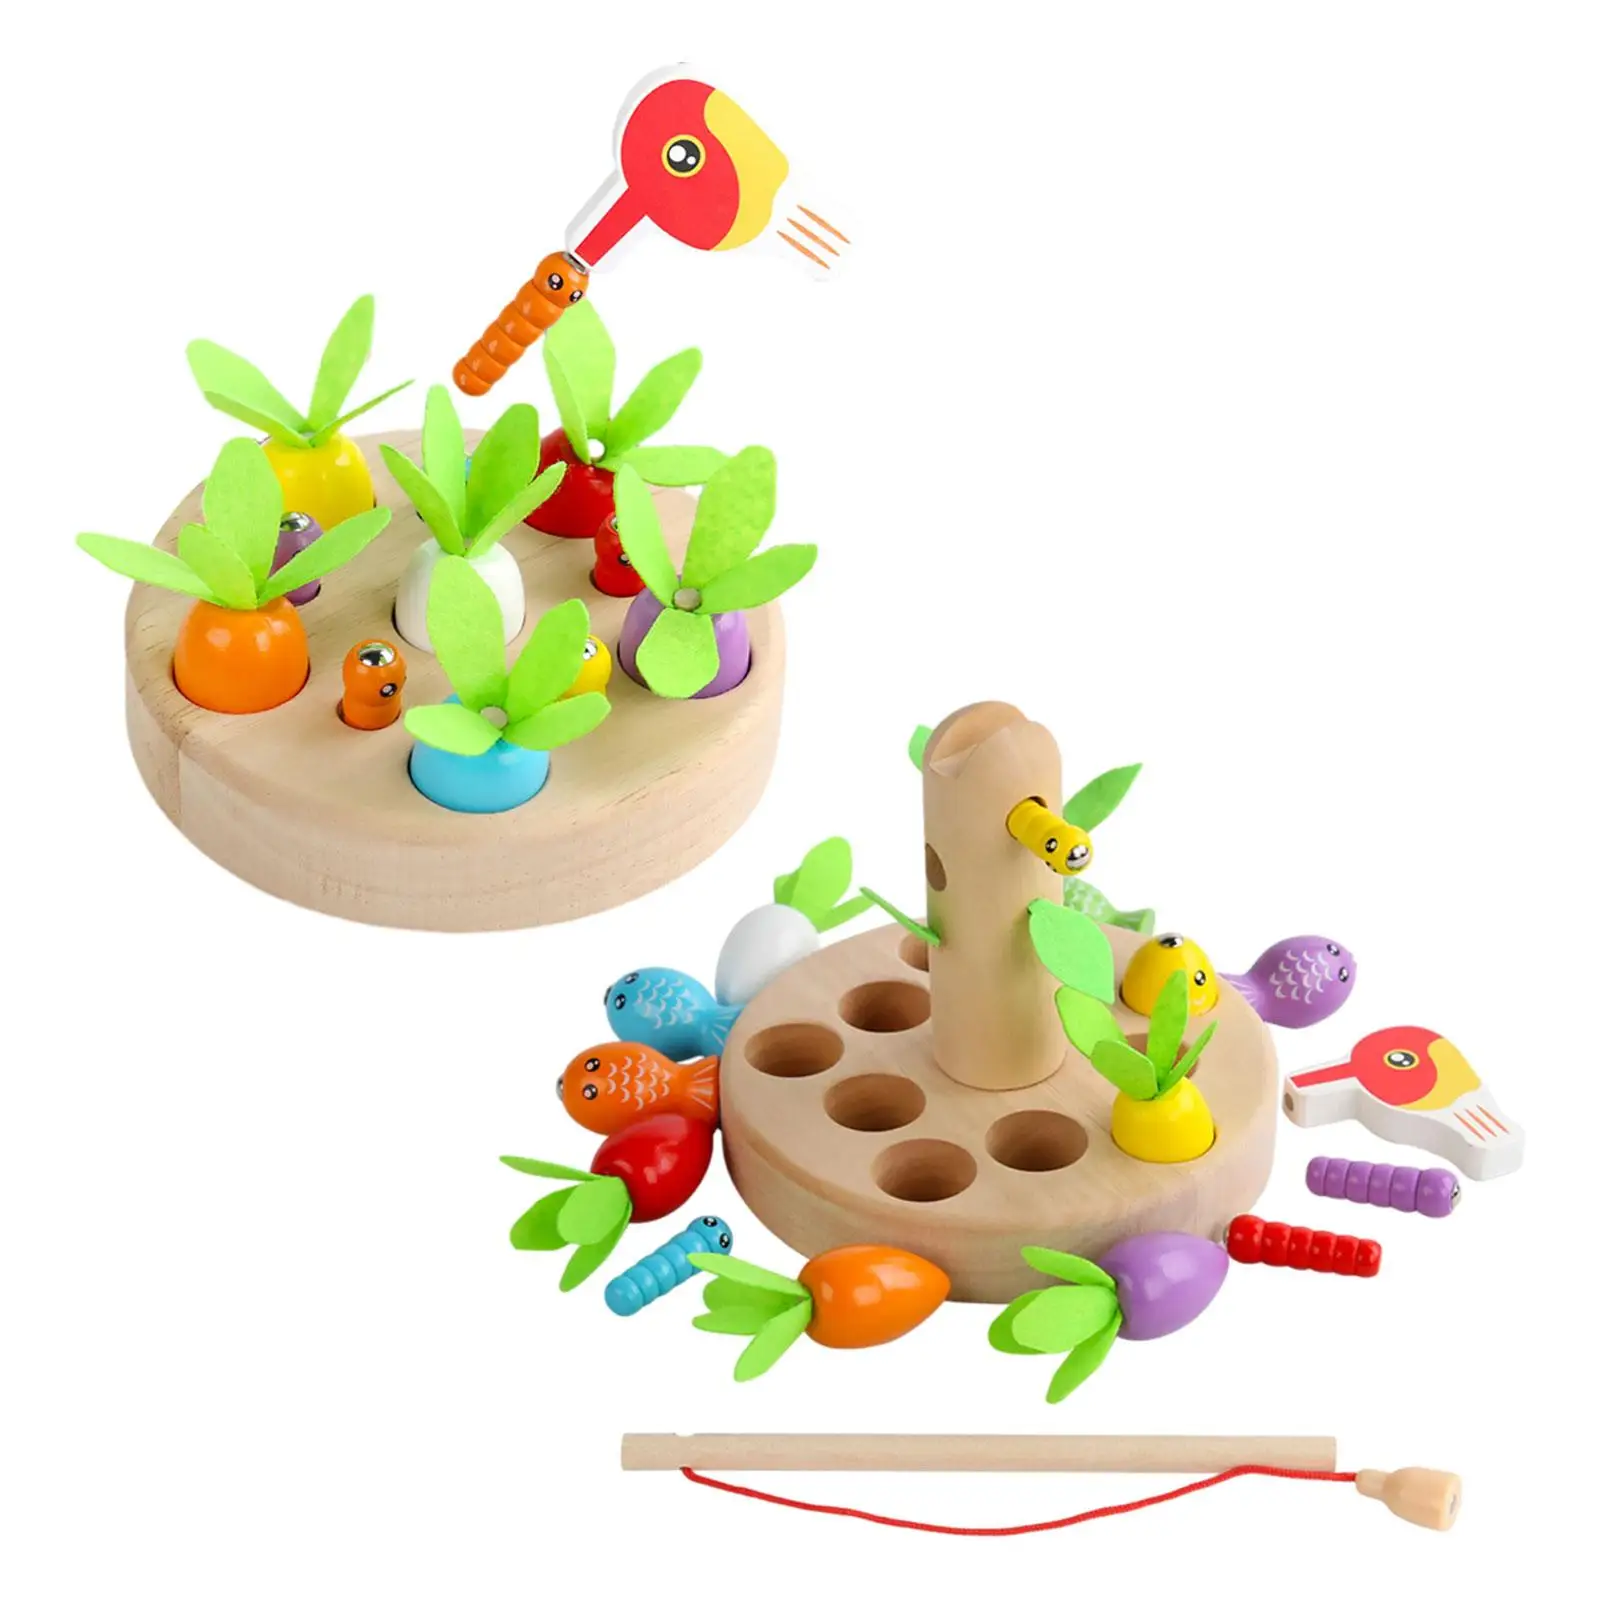 

Carrot Harvest Game Learning Activity Montessori Toy Radish Shape Matching Puzzle Wooden Toy for Kindergarten Holiday Gift Kids